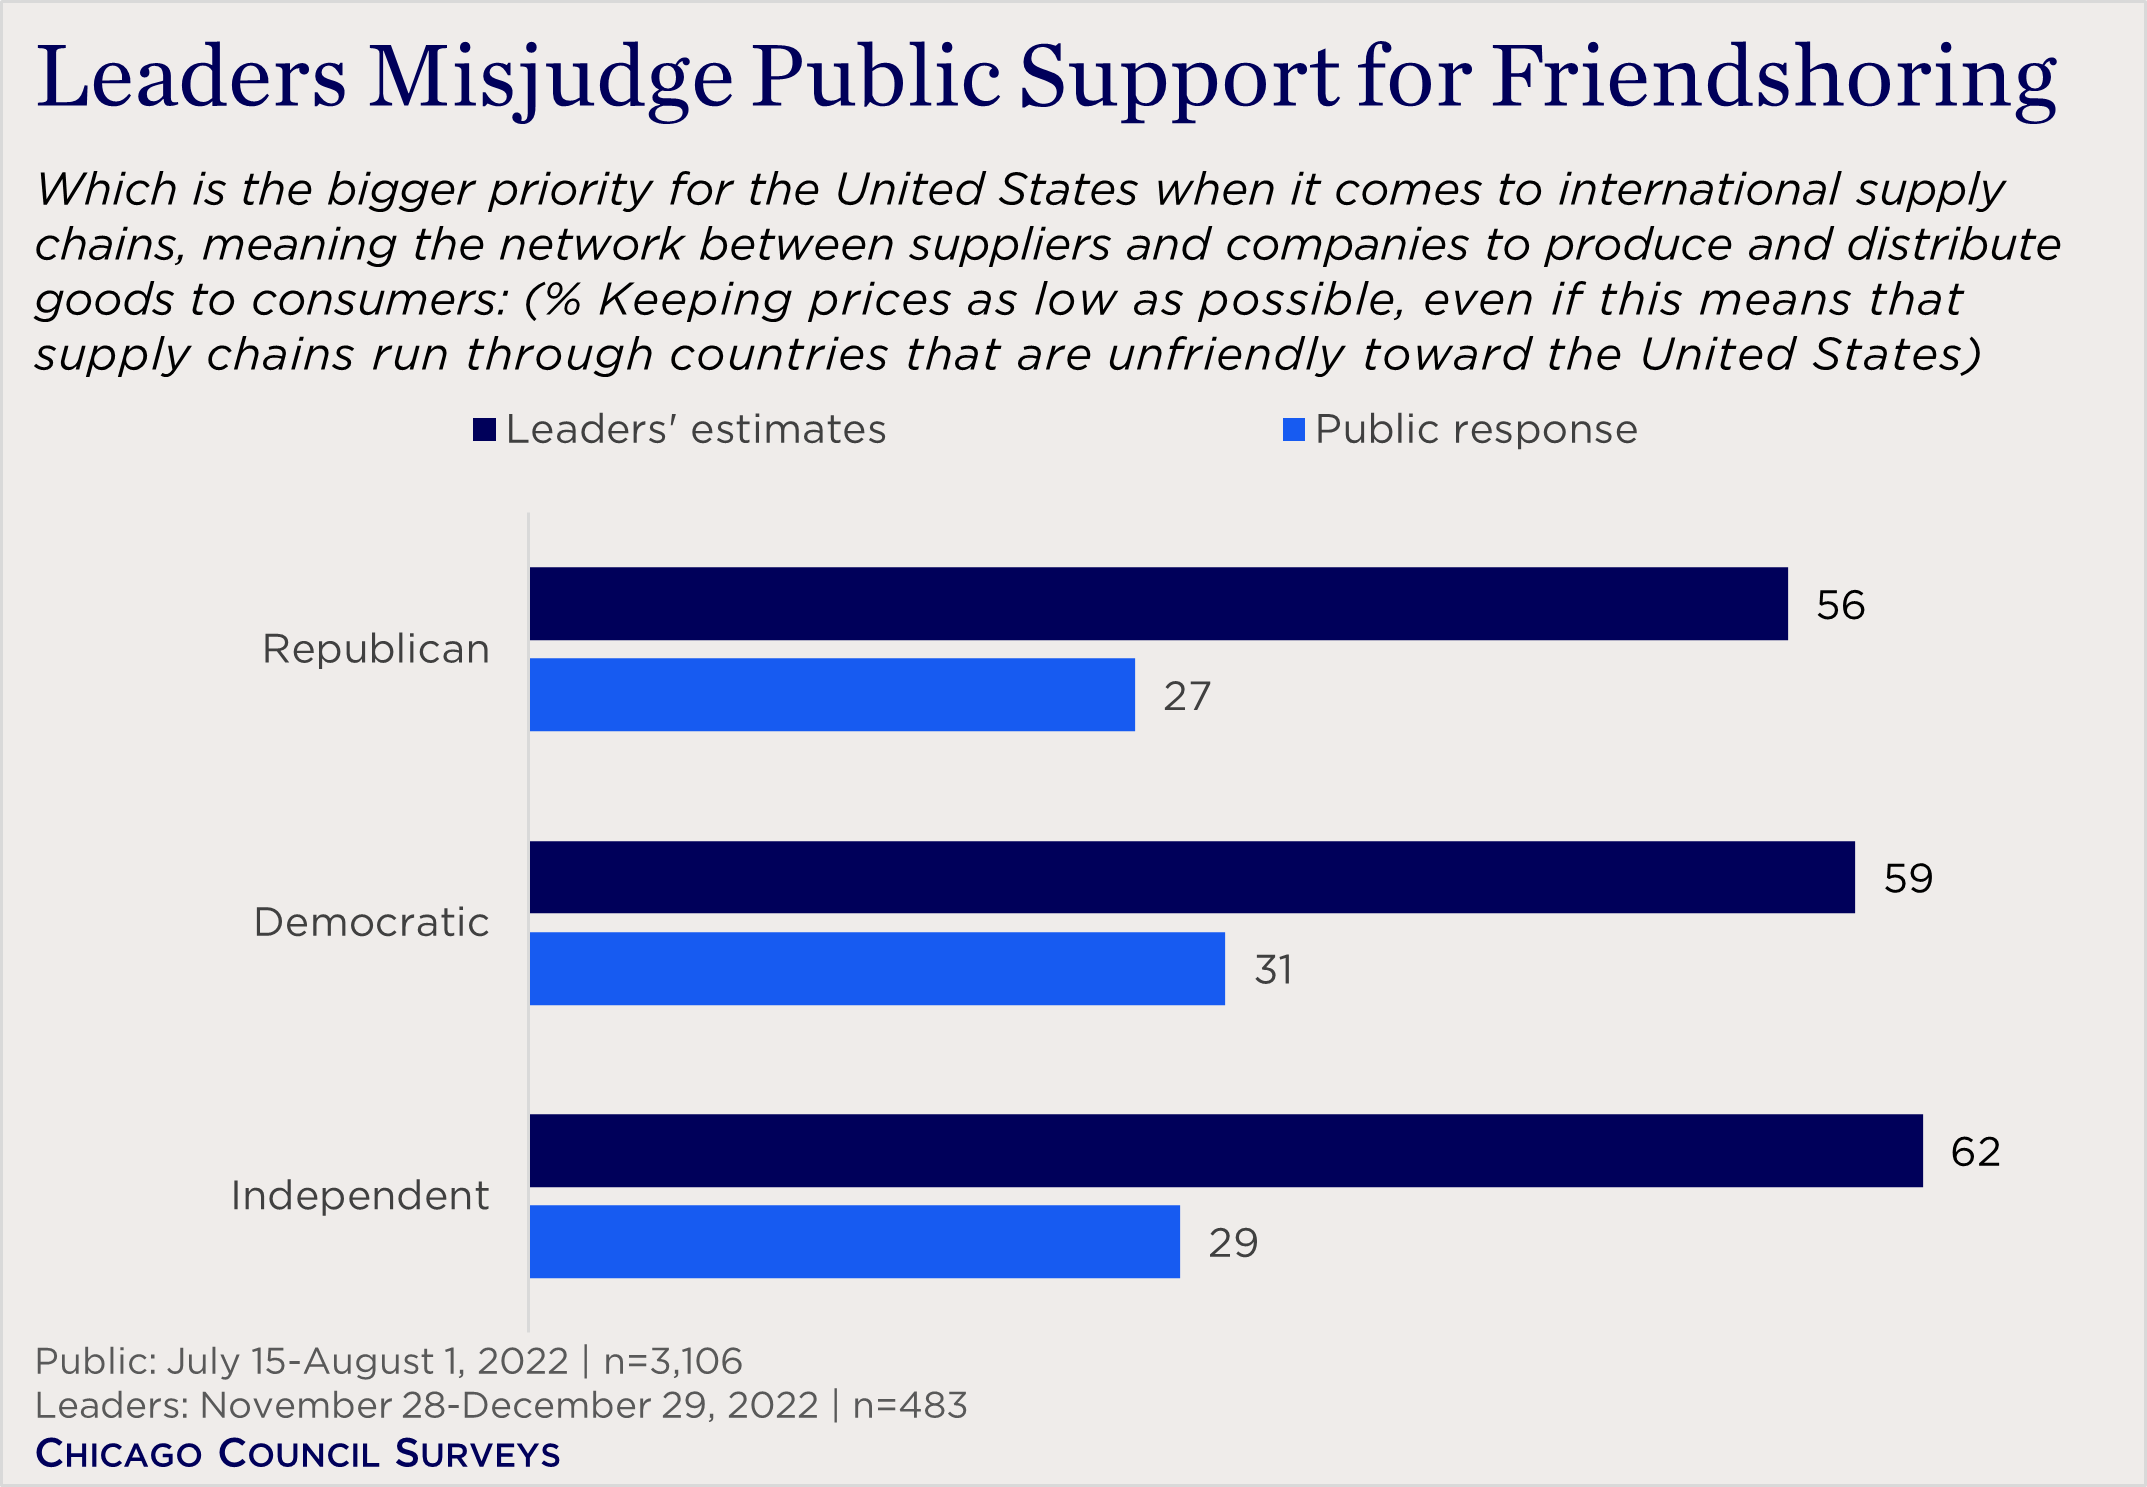 "bar chart showing leaders' midsjudgement of public support for friendshoring"